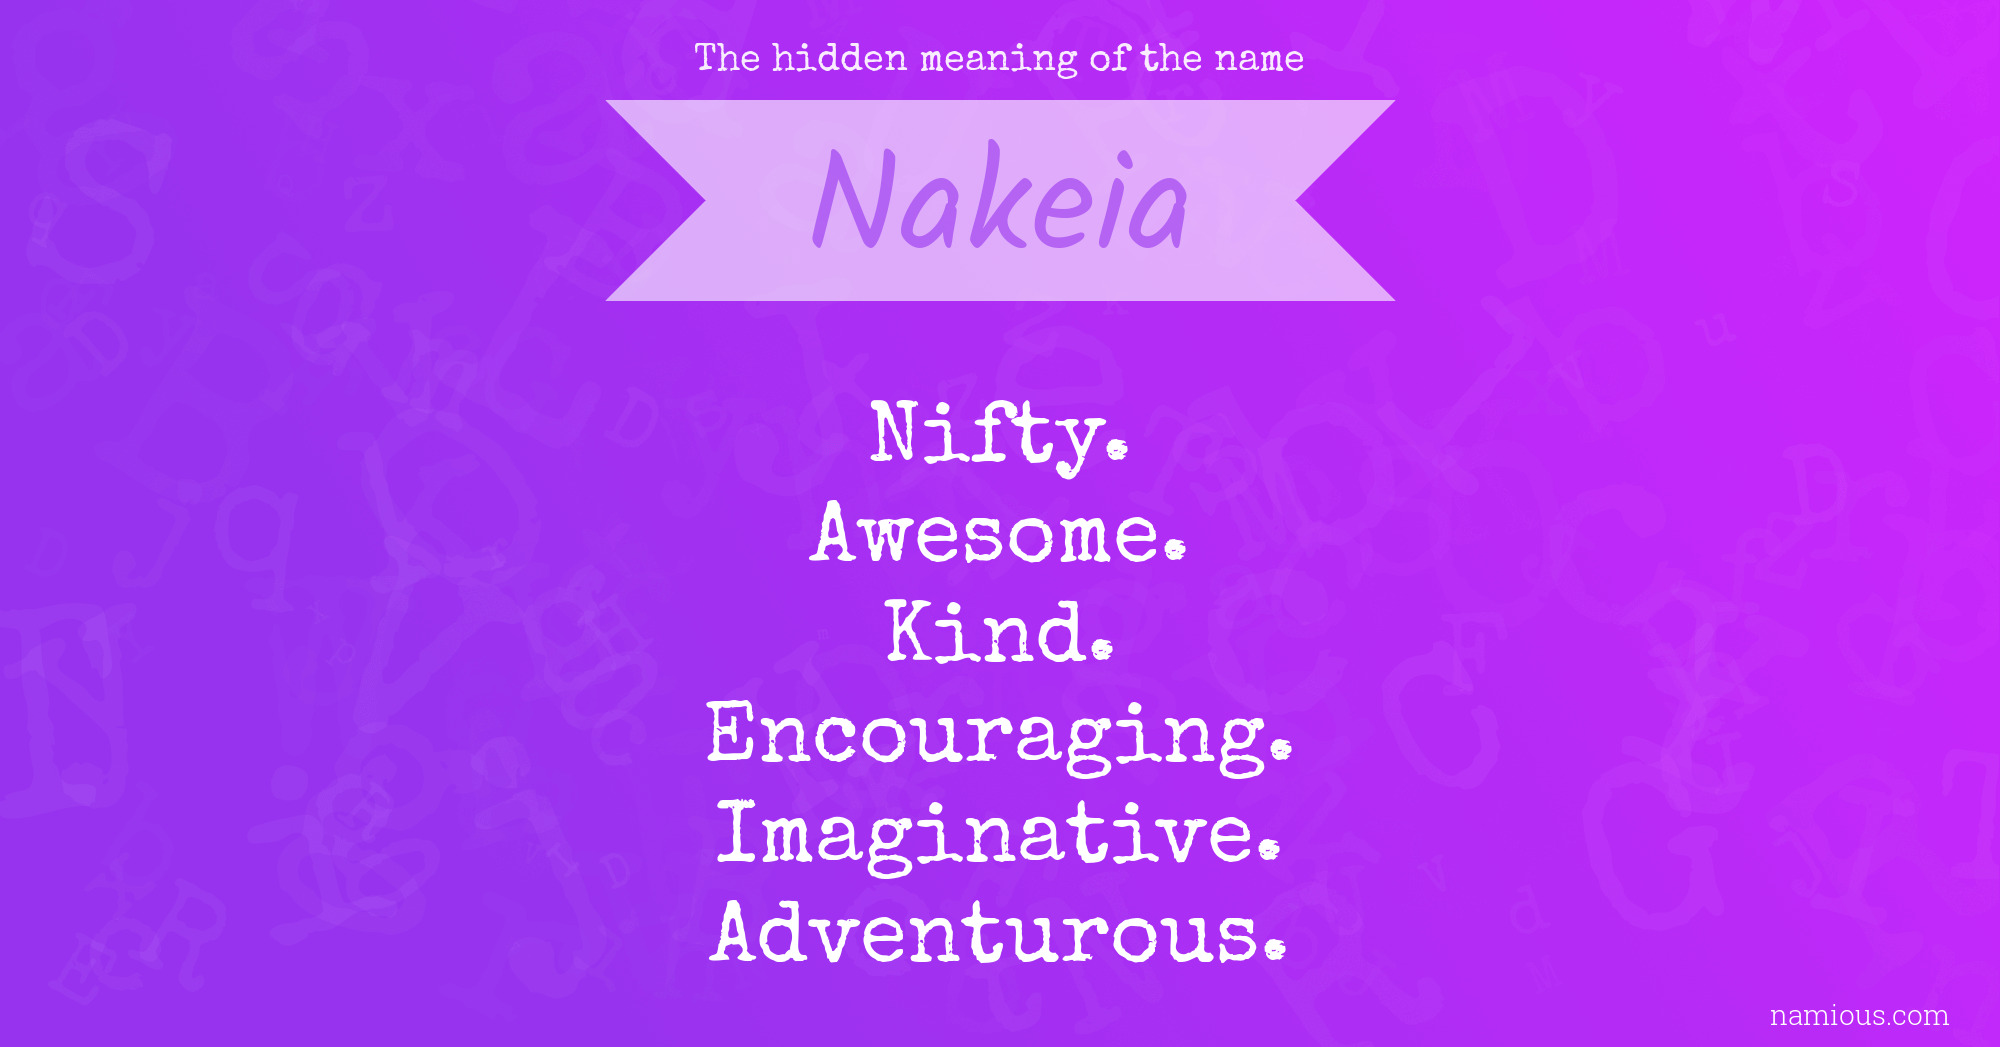 The hidden meaning of the name Nakeia